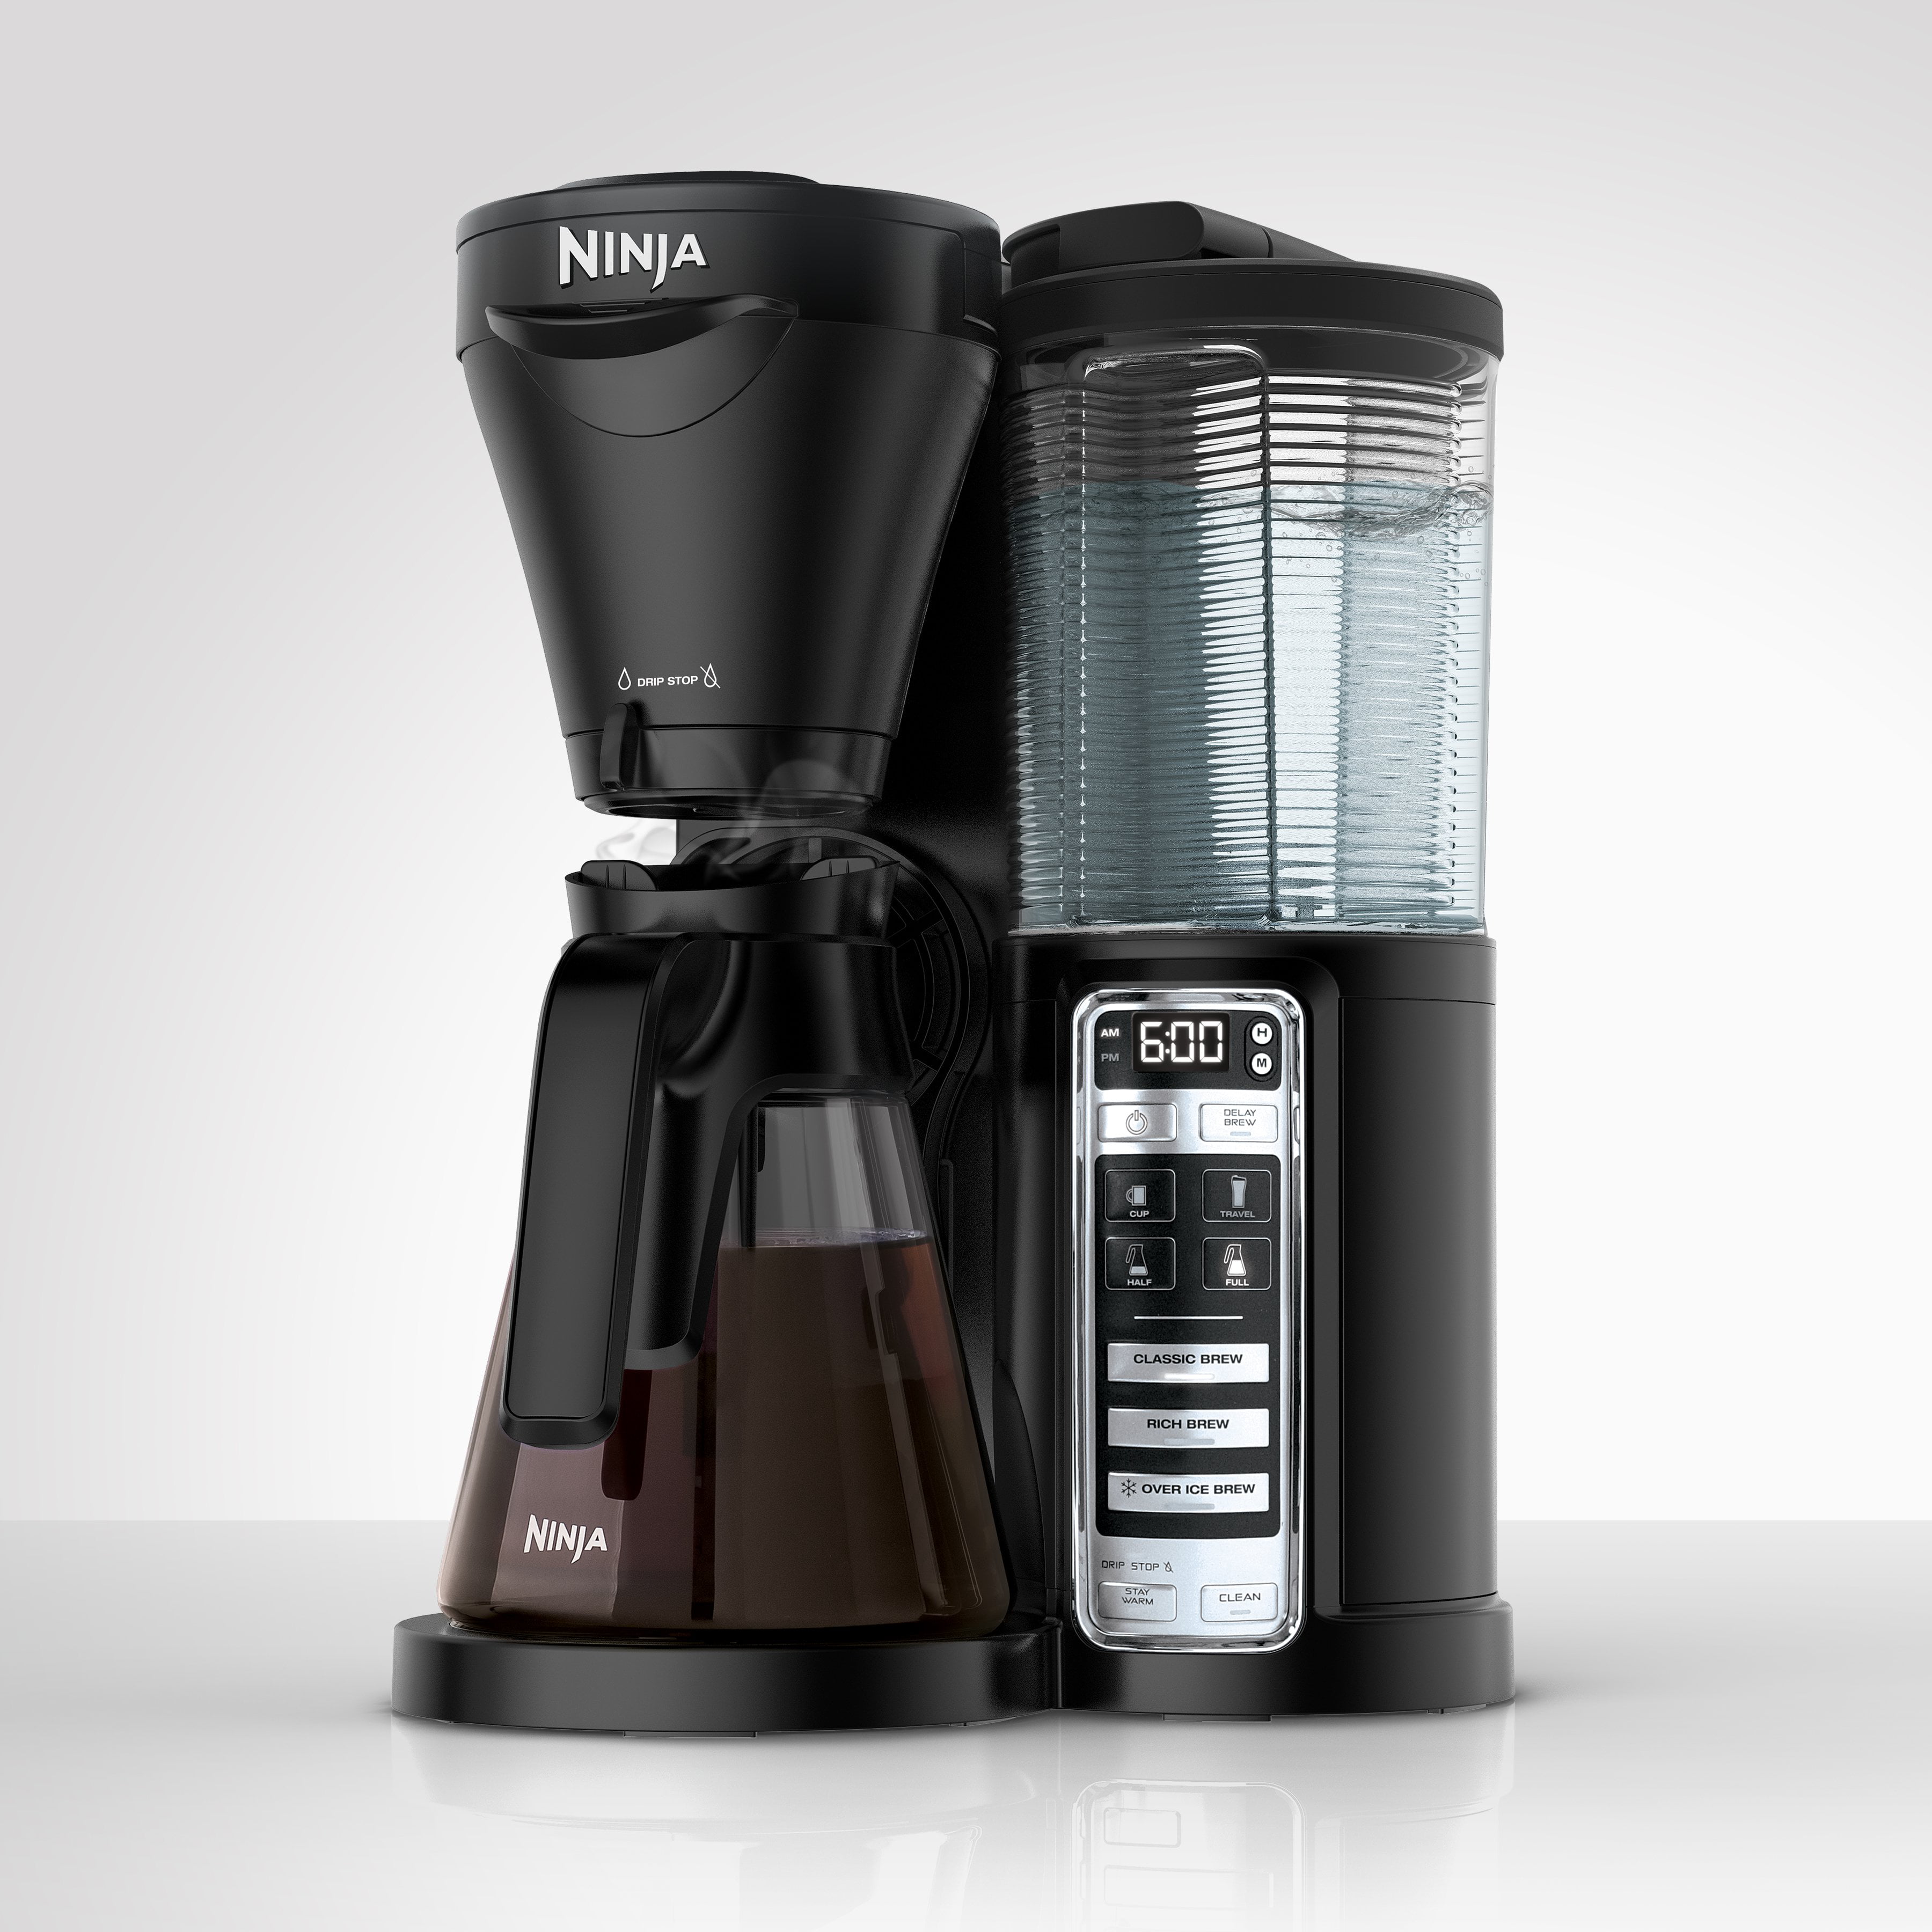 Ninja DualBrew Pro review: an advanced pour over coffee maker for